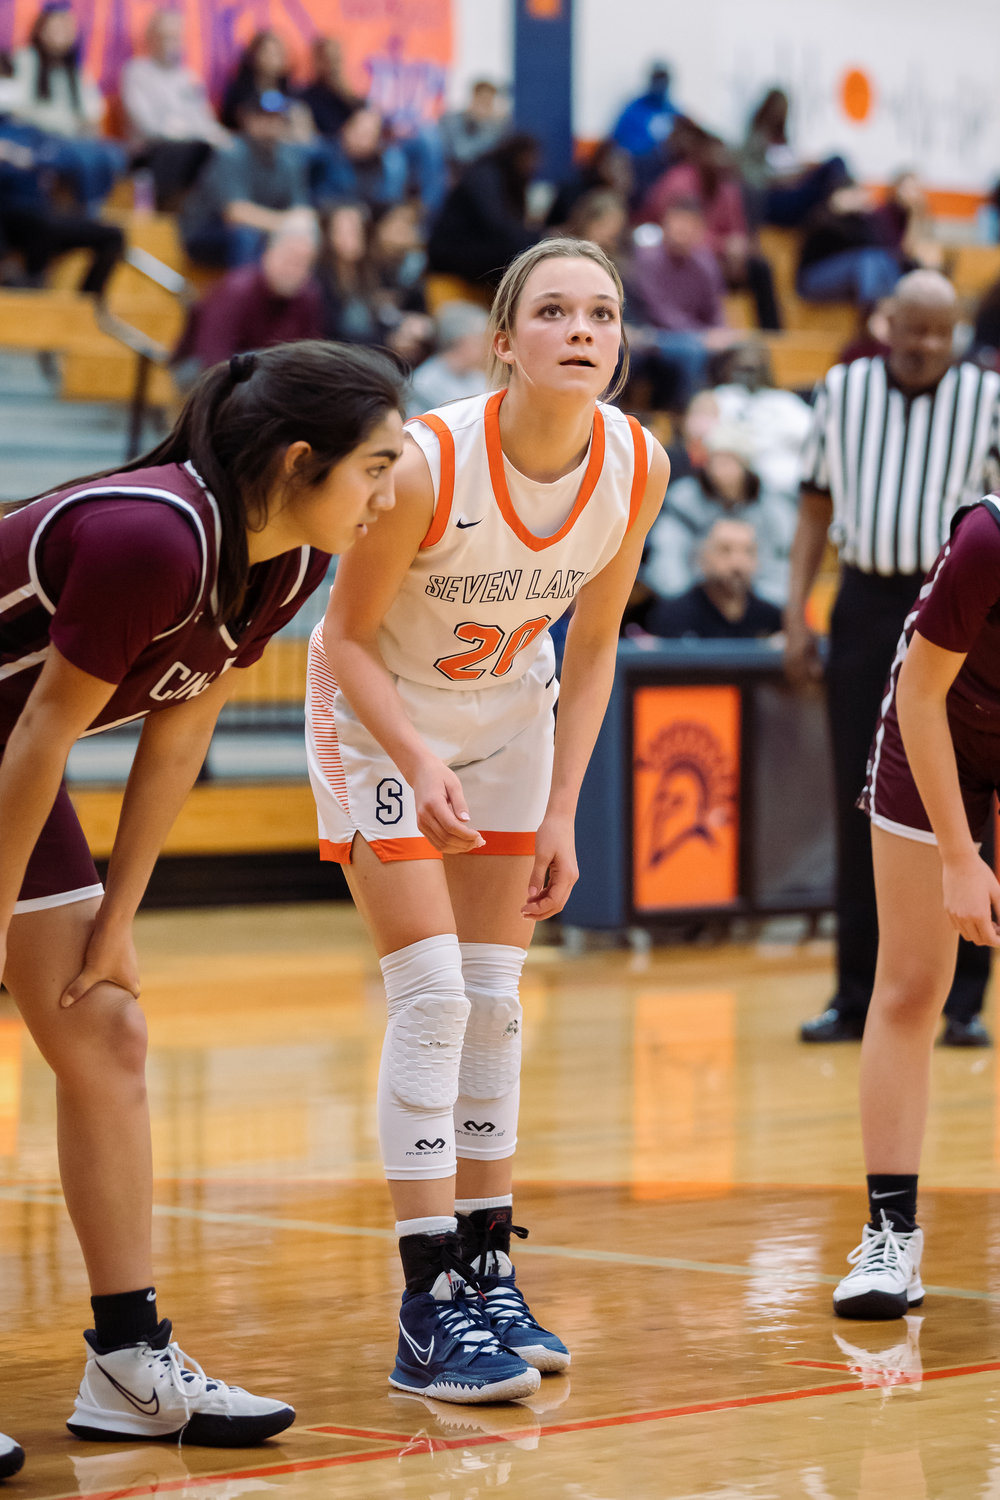 Seven Lakes Summer Halphen waits for a free throw during Tuesday's game against Cinco Ranch.